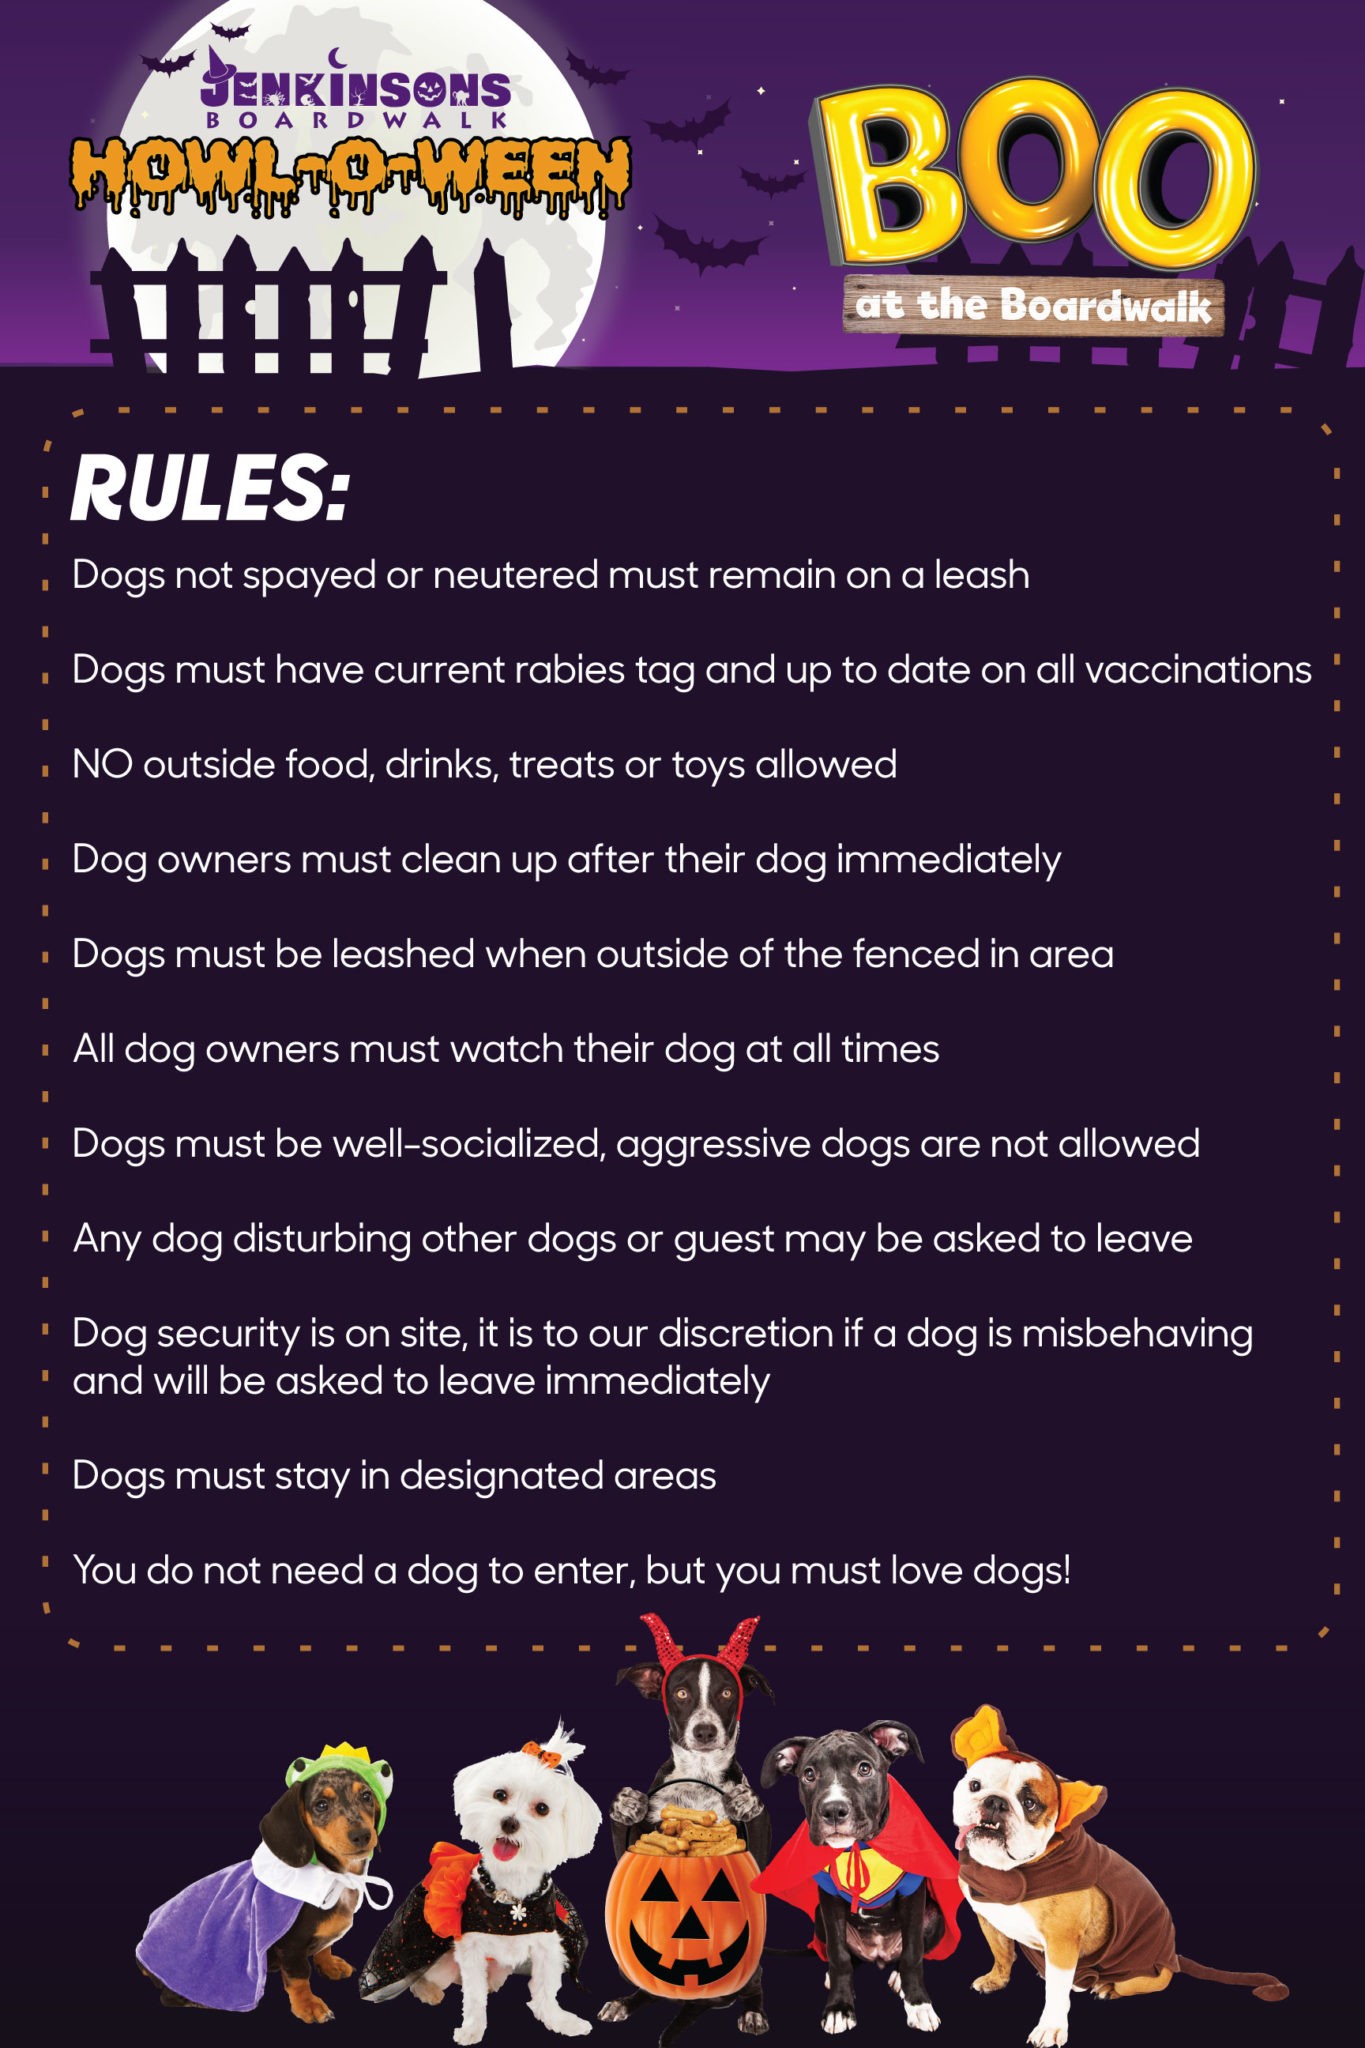 Jenkinson's Boardwalk Howl-O-Ween Dog Contest Costume Rules. You do not need a dog to enter.